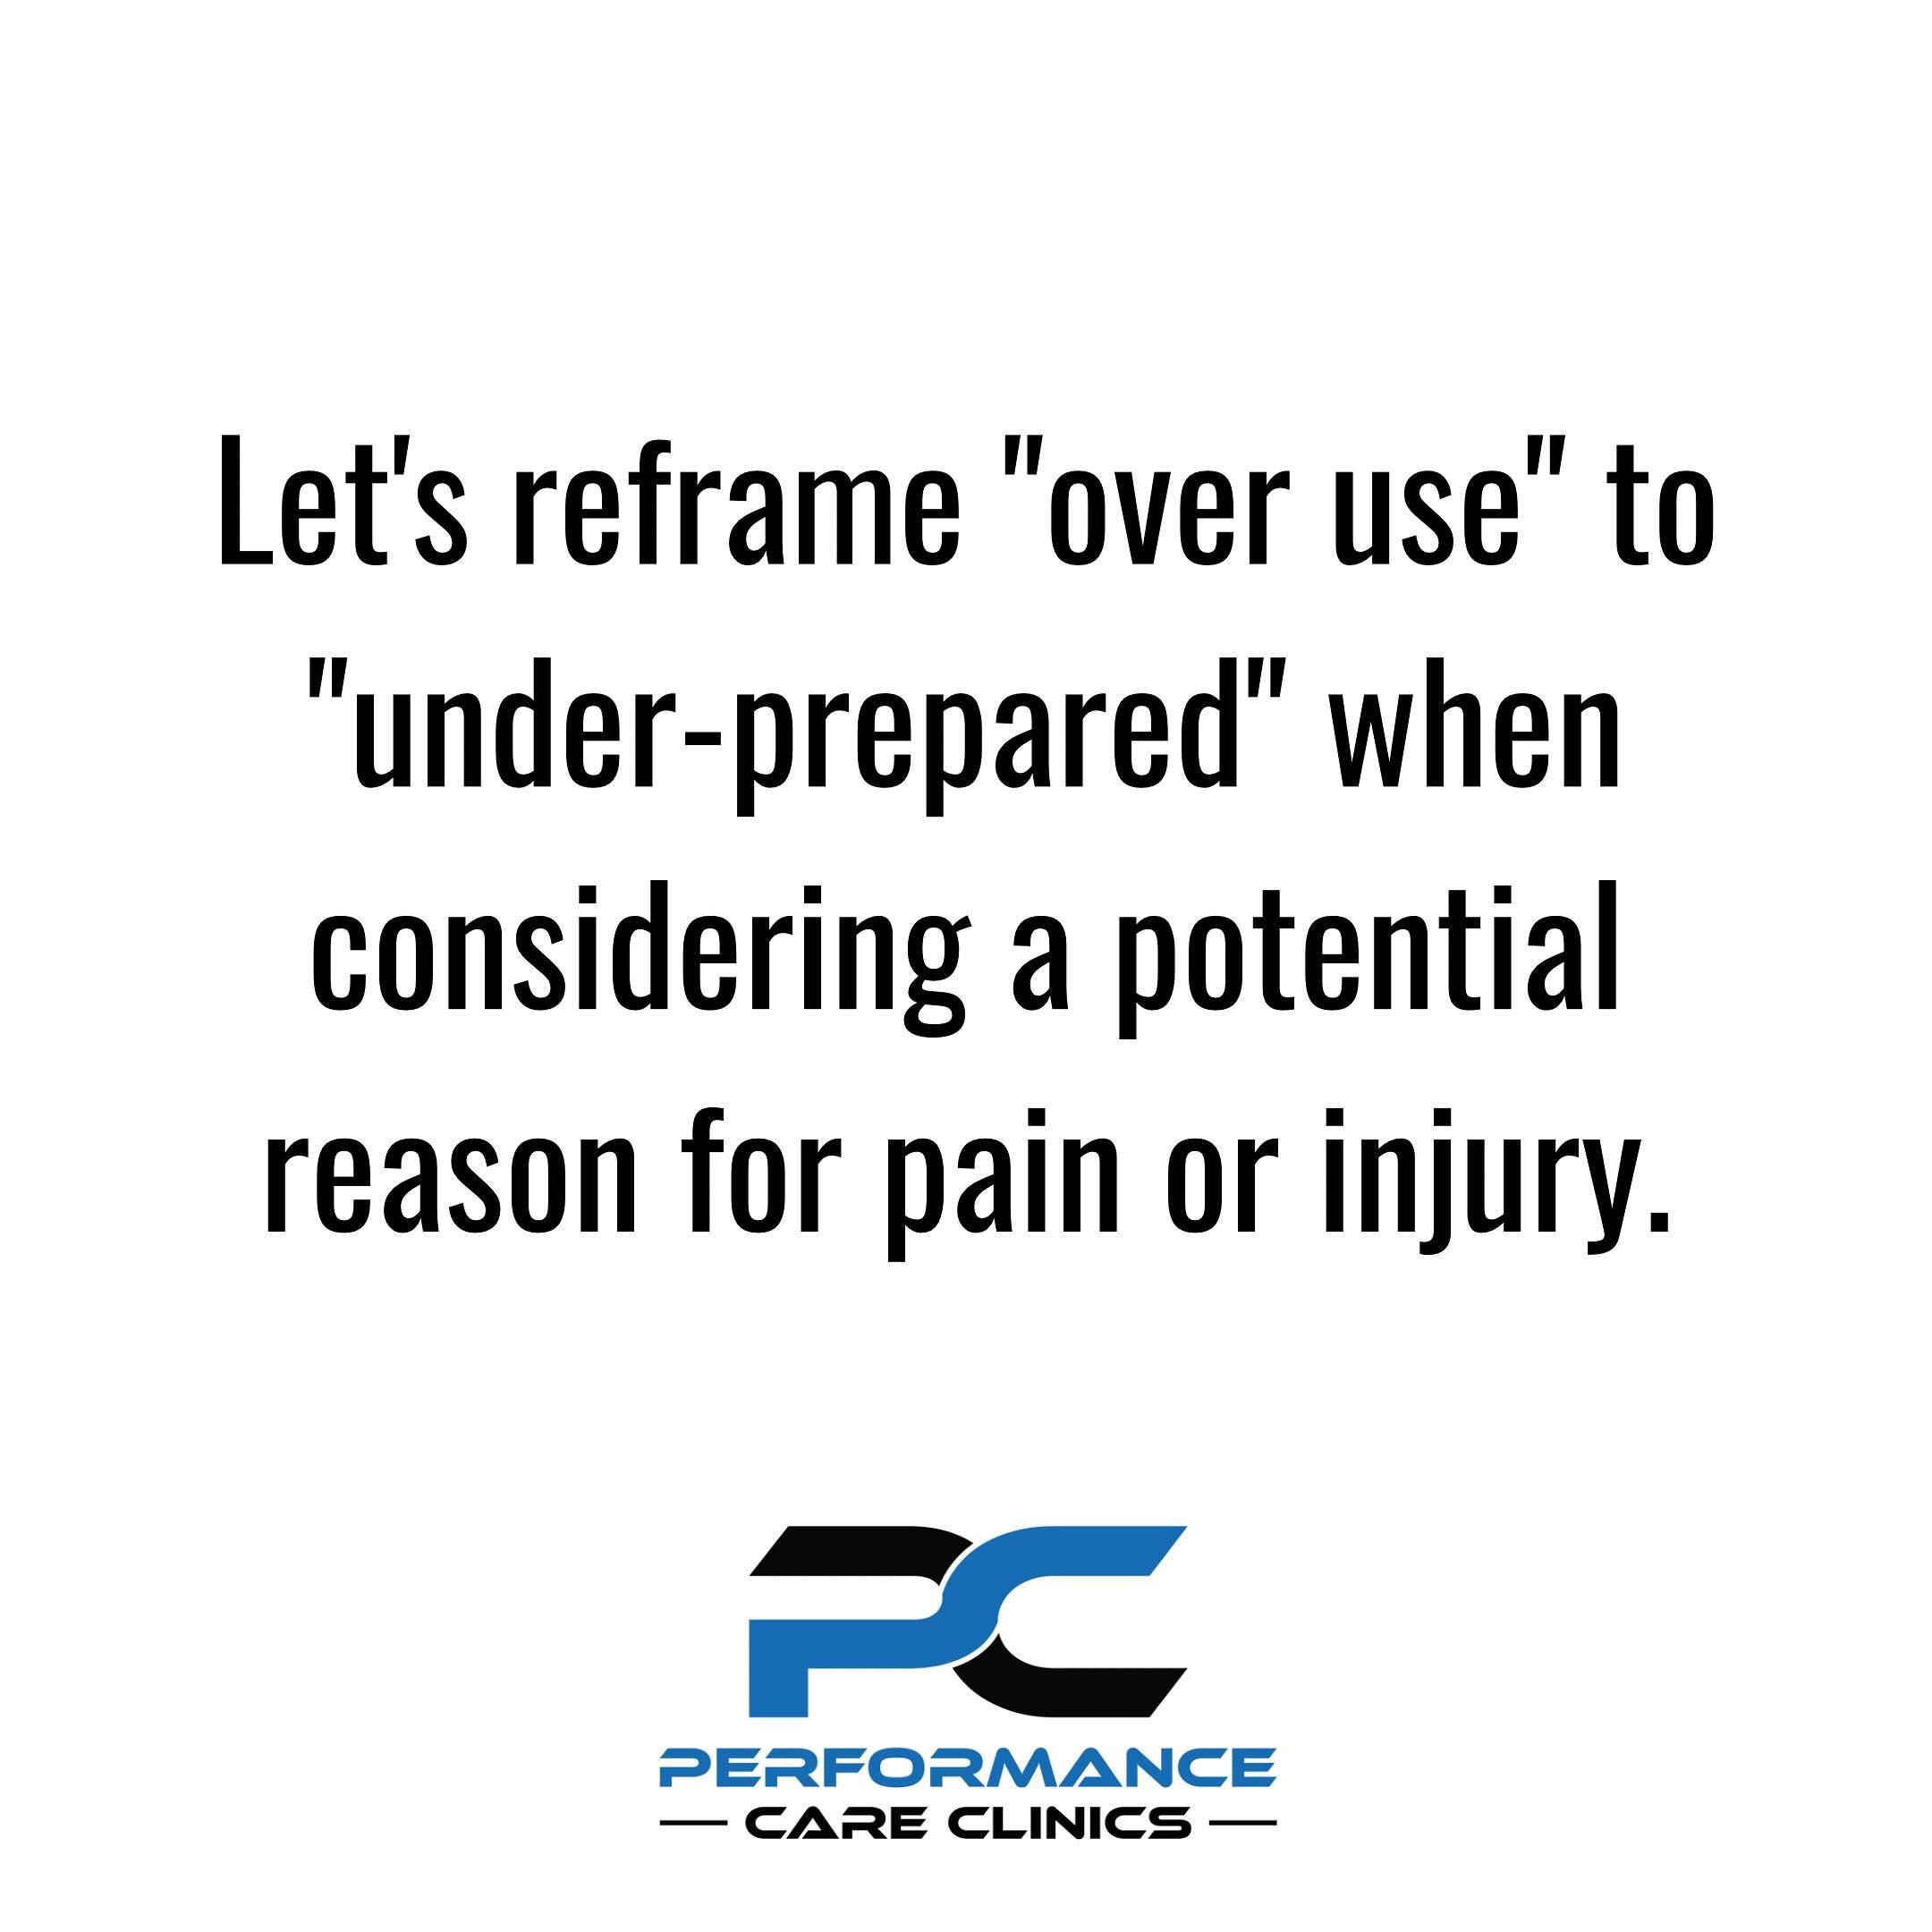 Let us help you BE BETTER PREPARED for the demands of your life or sport!
.
#TGIF #physicaltherapy #rehab #pain #injury #tampa #washingtondc #dc #dmv #southtampa #tampafitness #dcevents #arlingtonva #arlington #mcleanva #mclean #nova #physiotherapy #